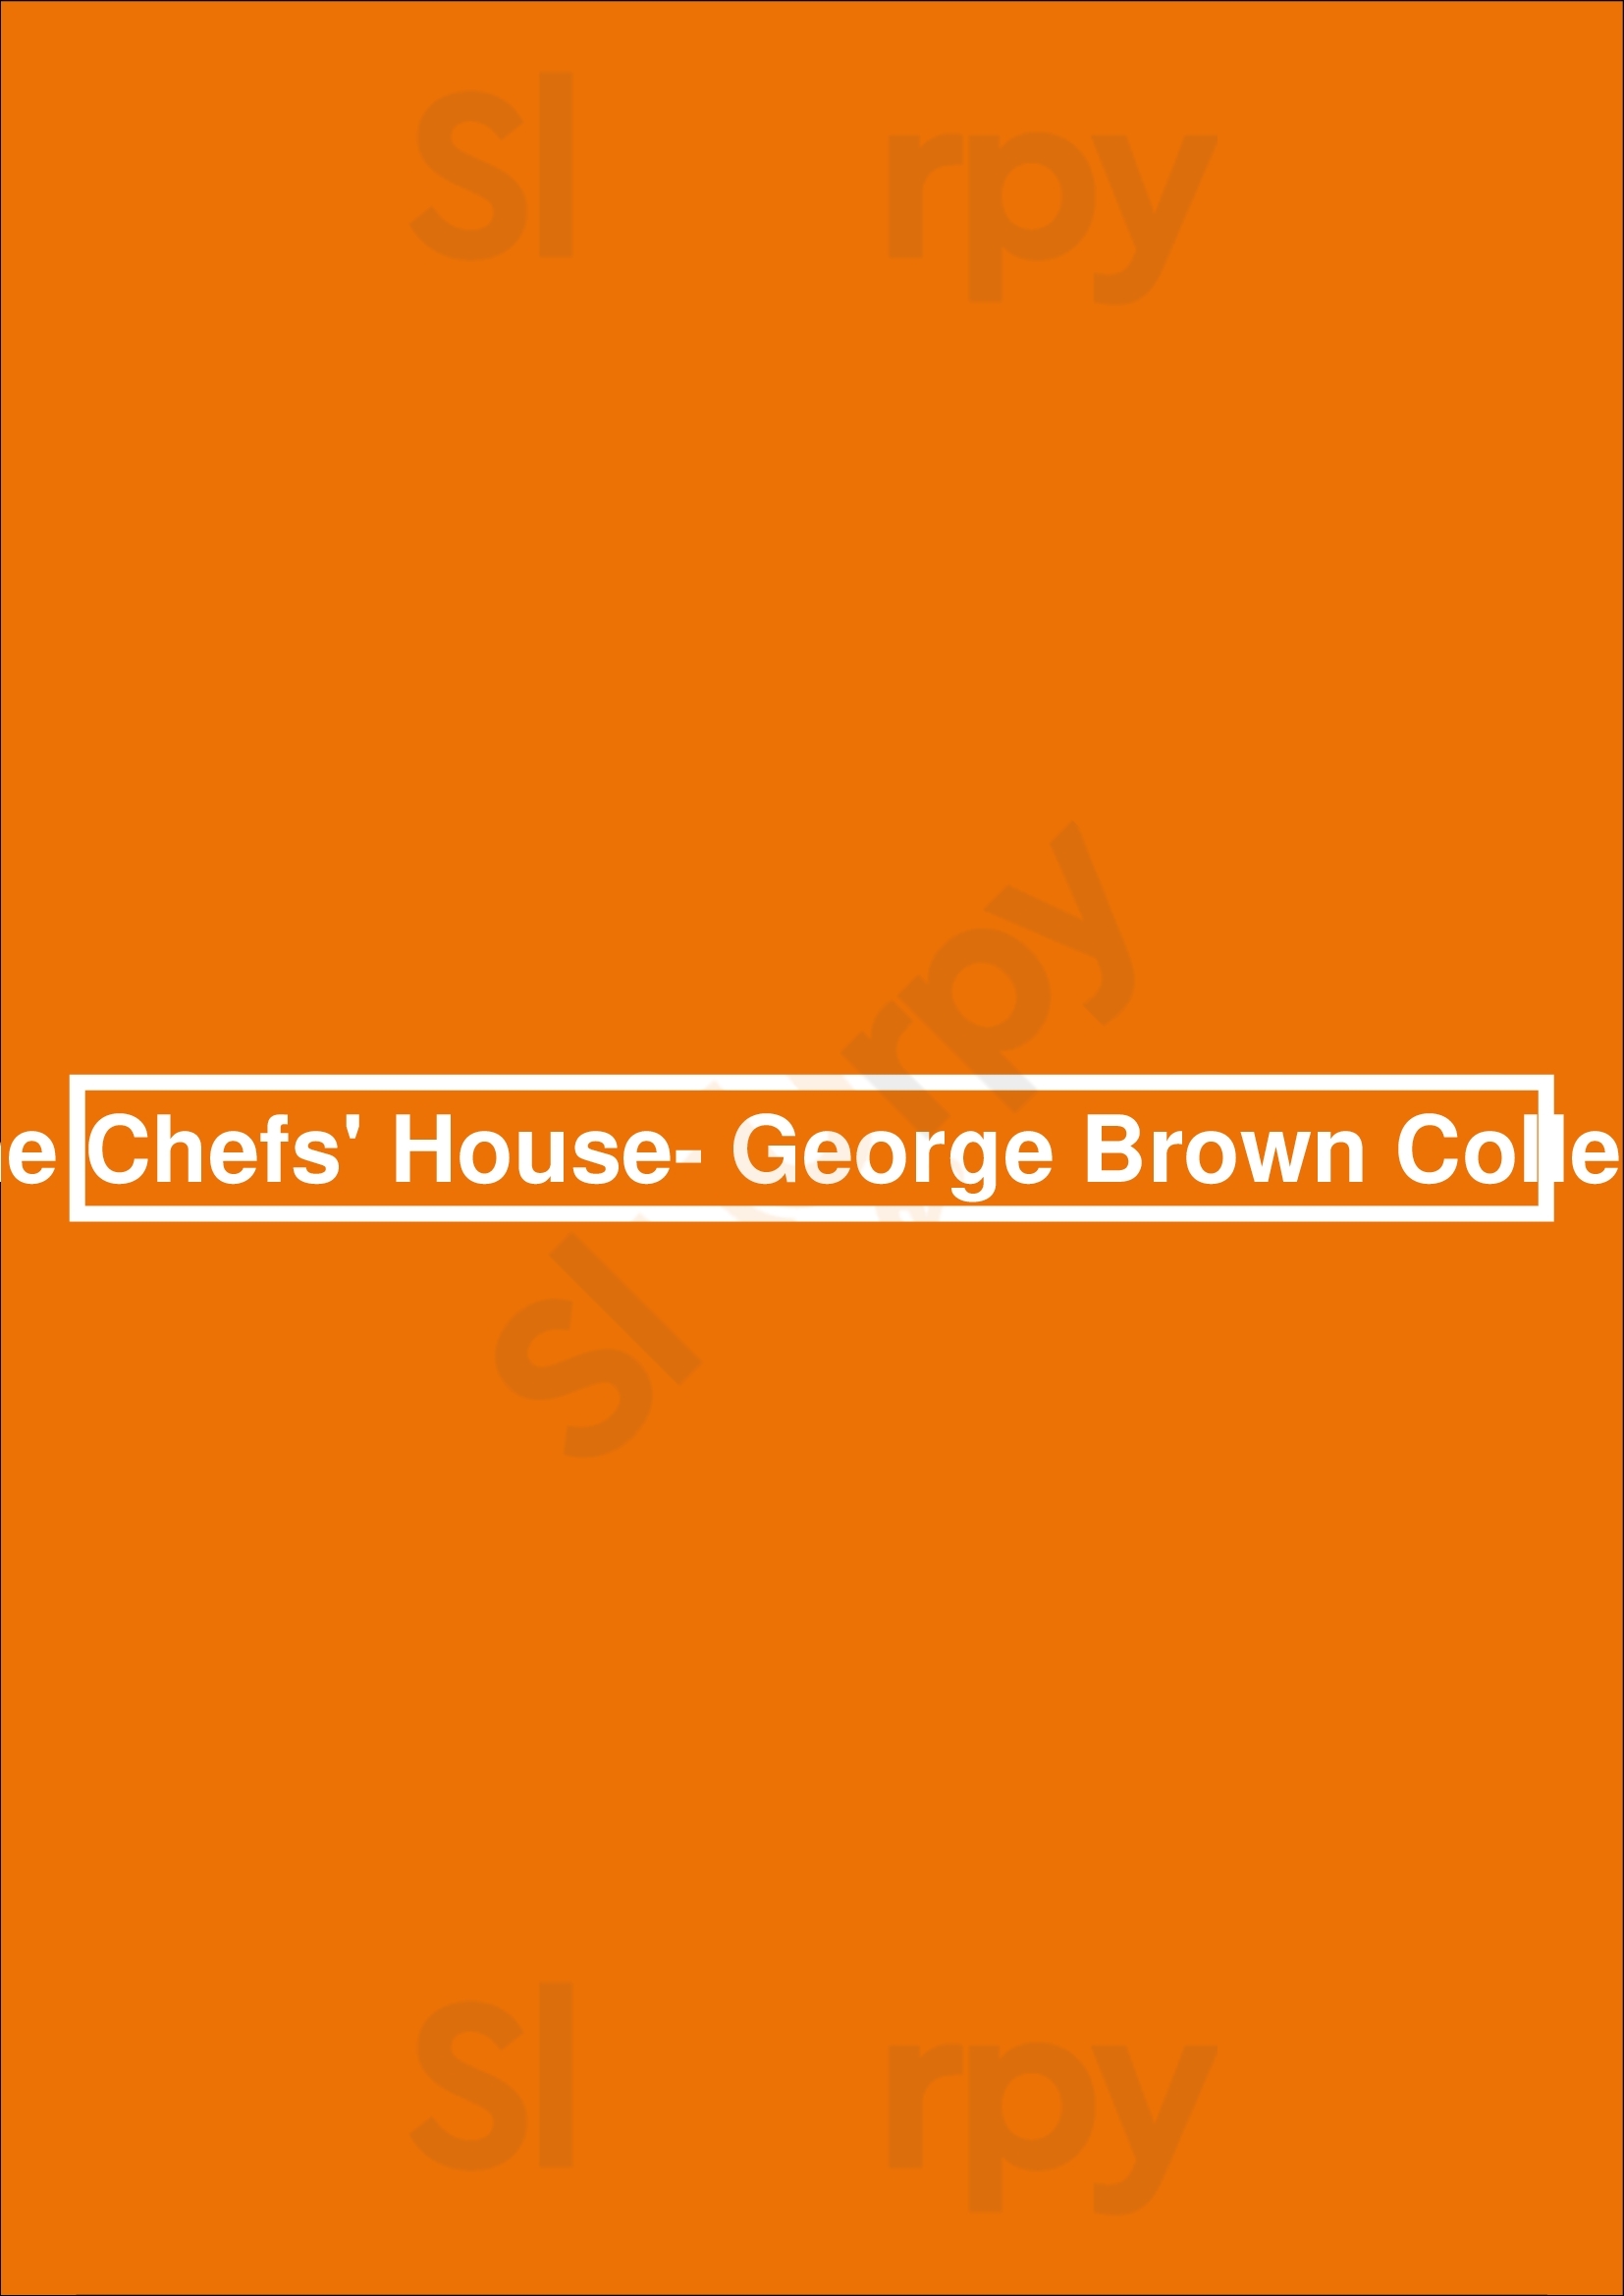 The Chefs' House- George Brown College Toronto Menu - 1